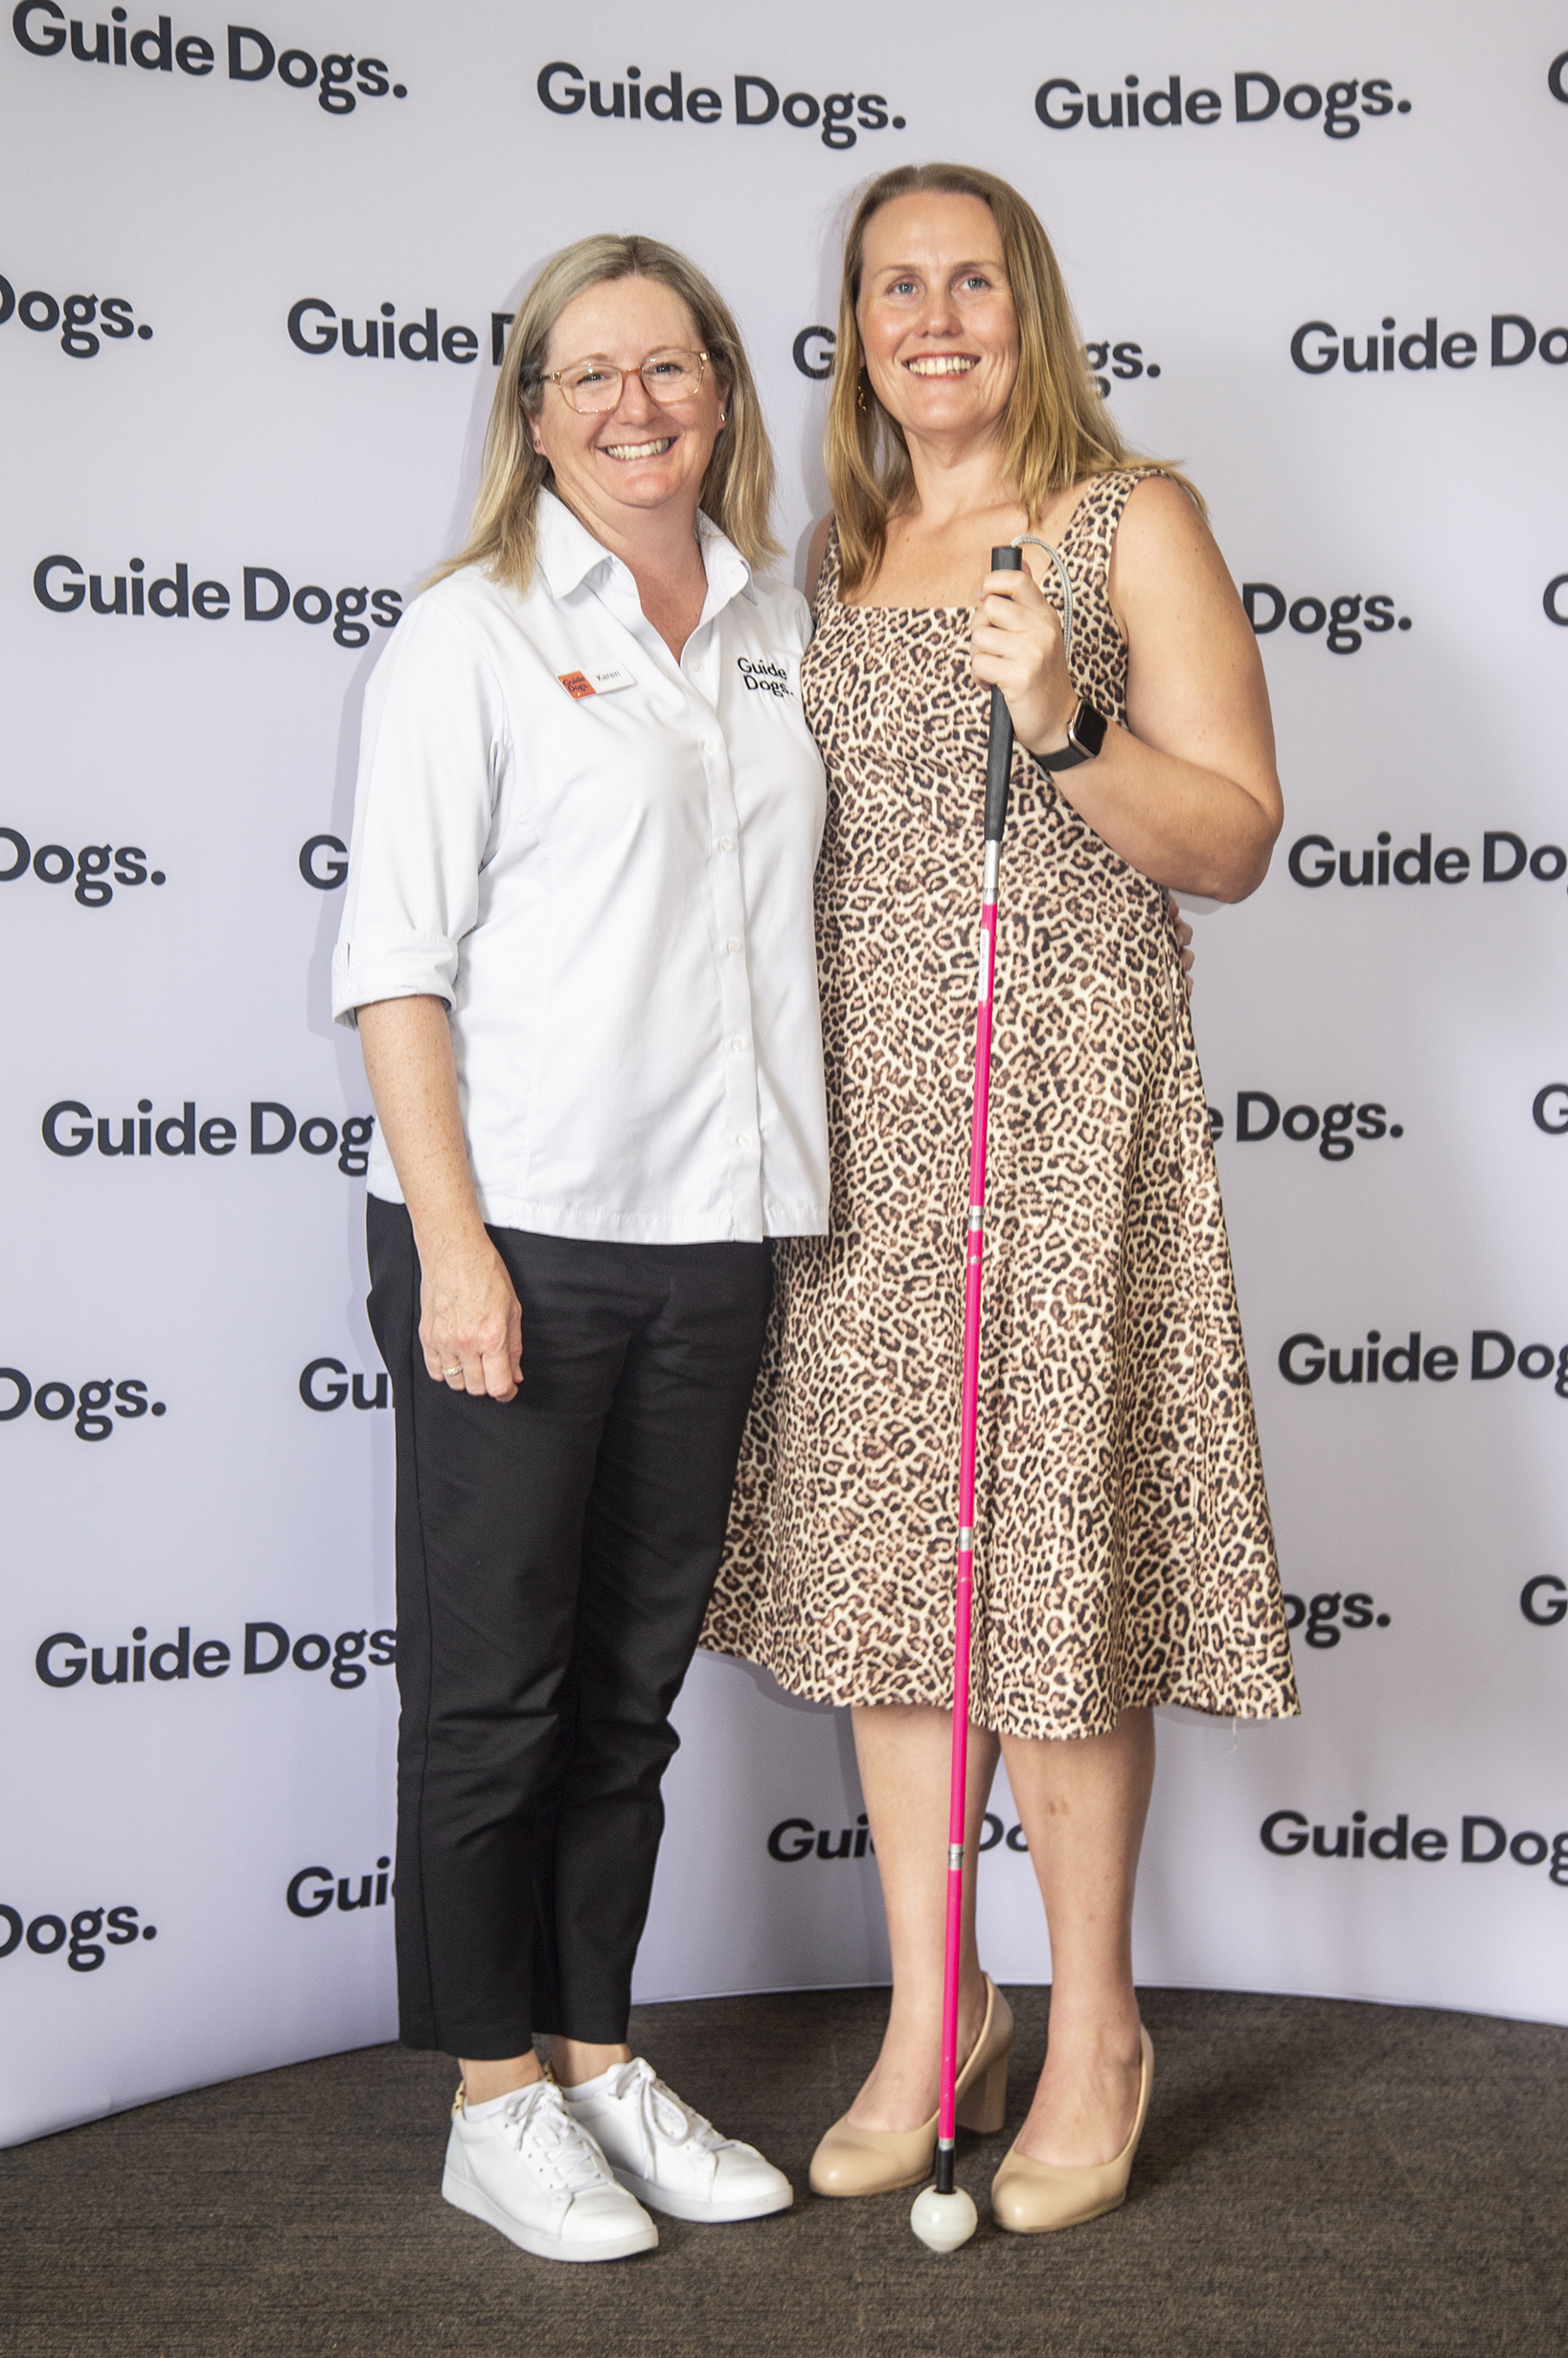 Karen (left) is standing next to one of her orientation and mobility Clients (right) who is holding their White Cane and smiling in front of a Guide Dogs media wall.